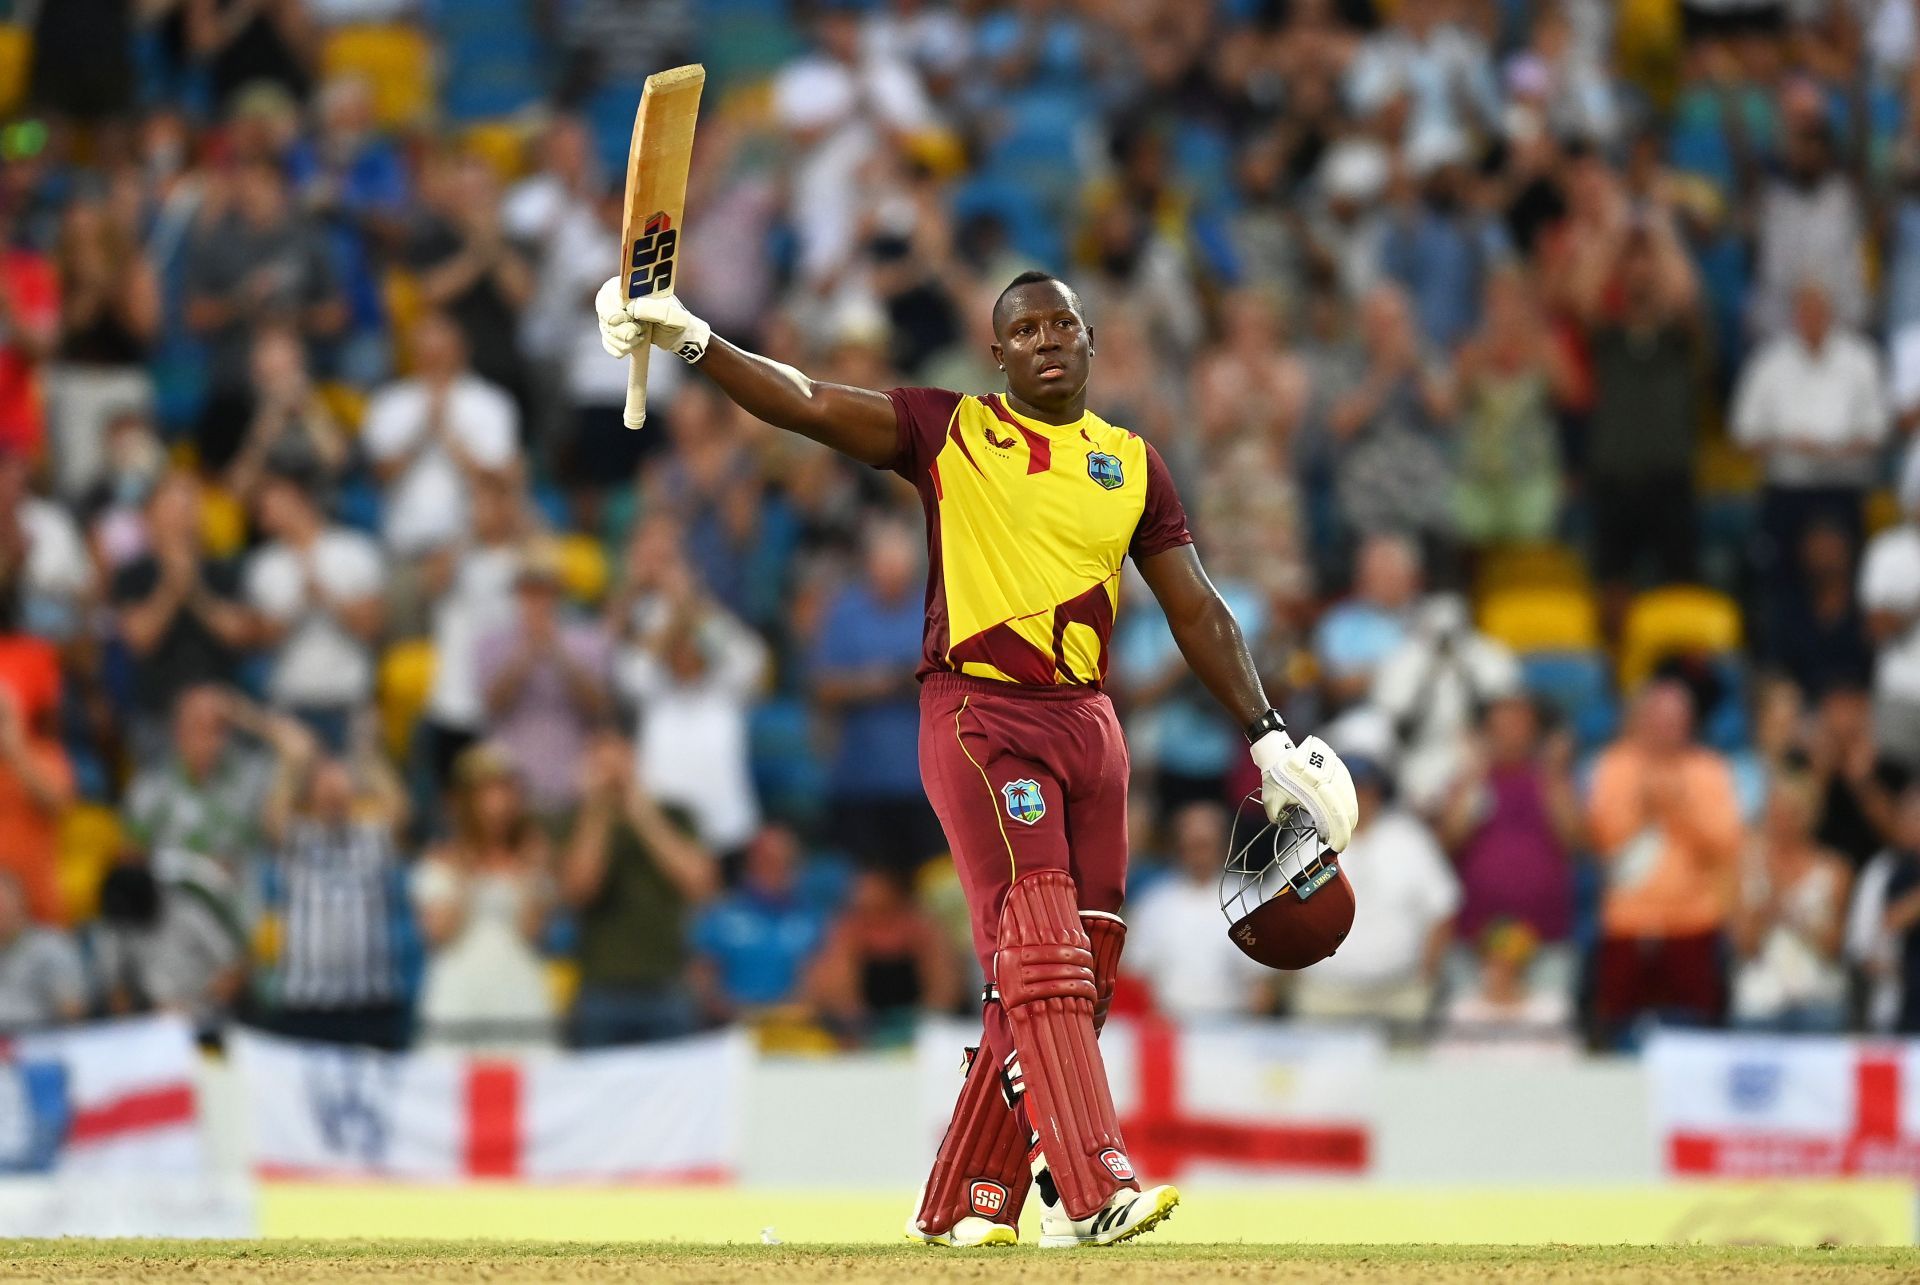 Rovman Powell recently scored a century for the West Indies team in T20 internationals